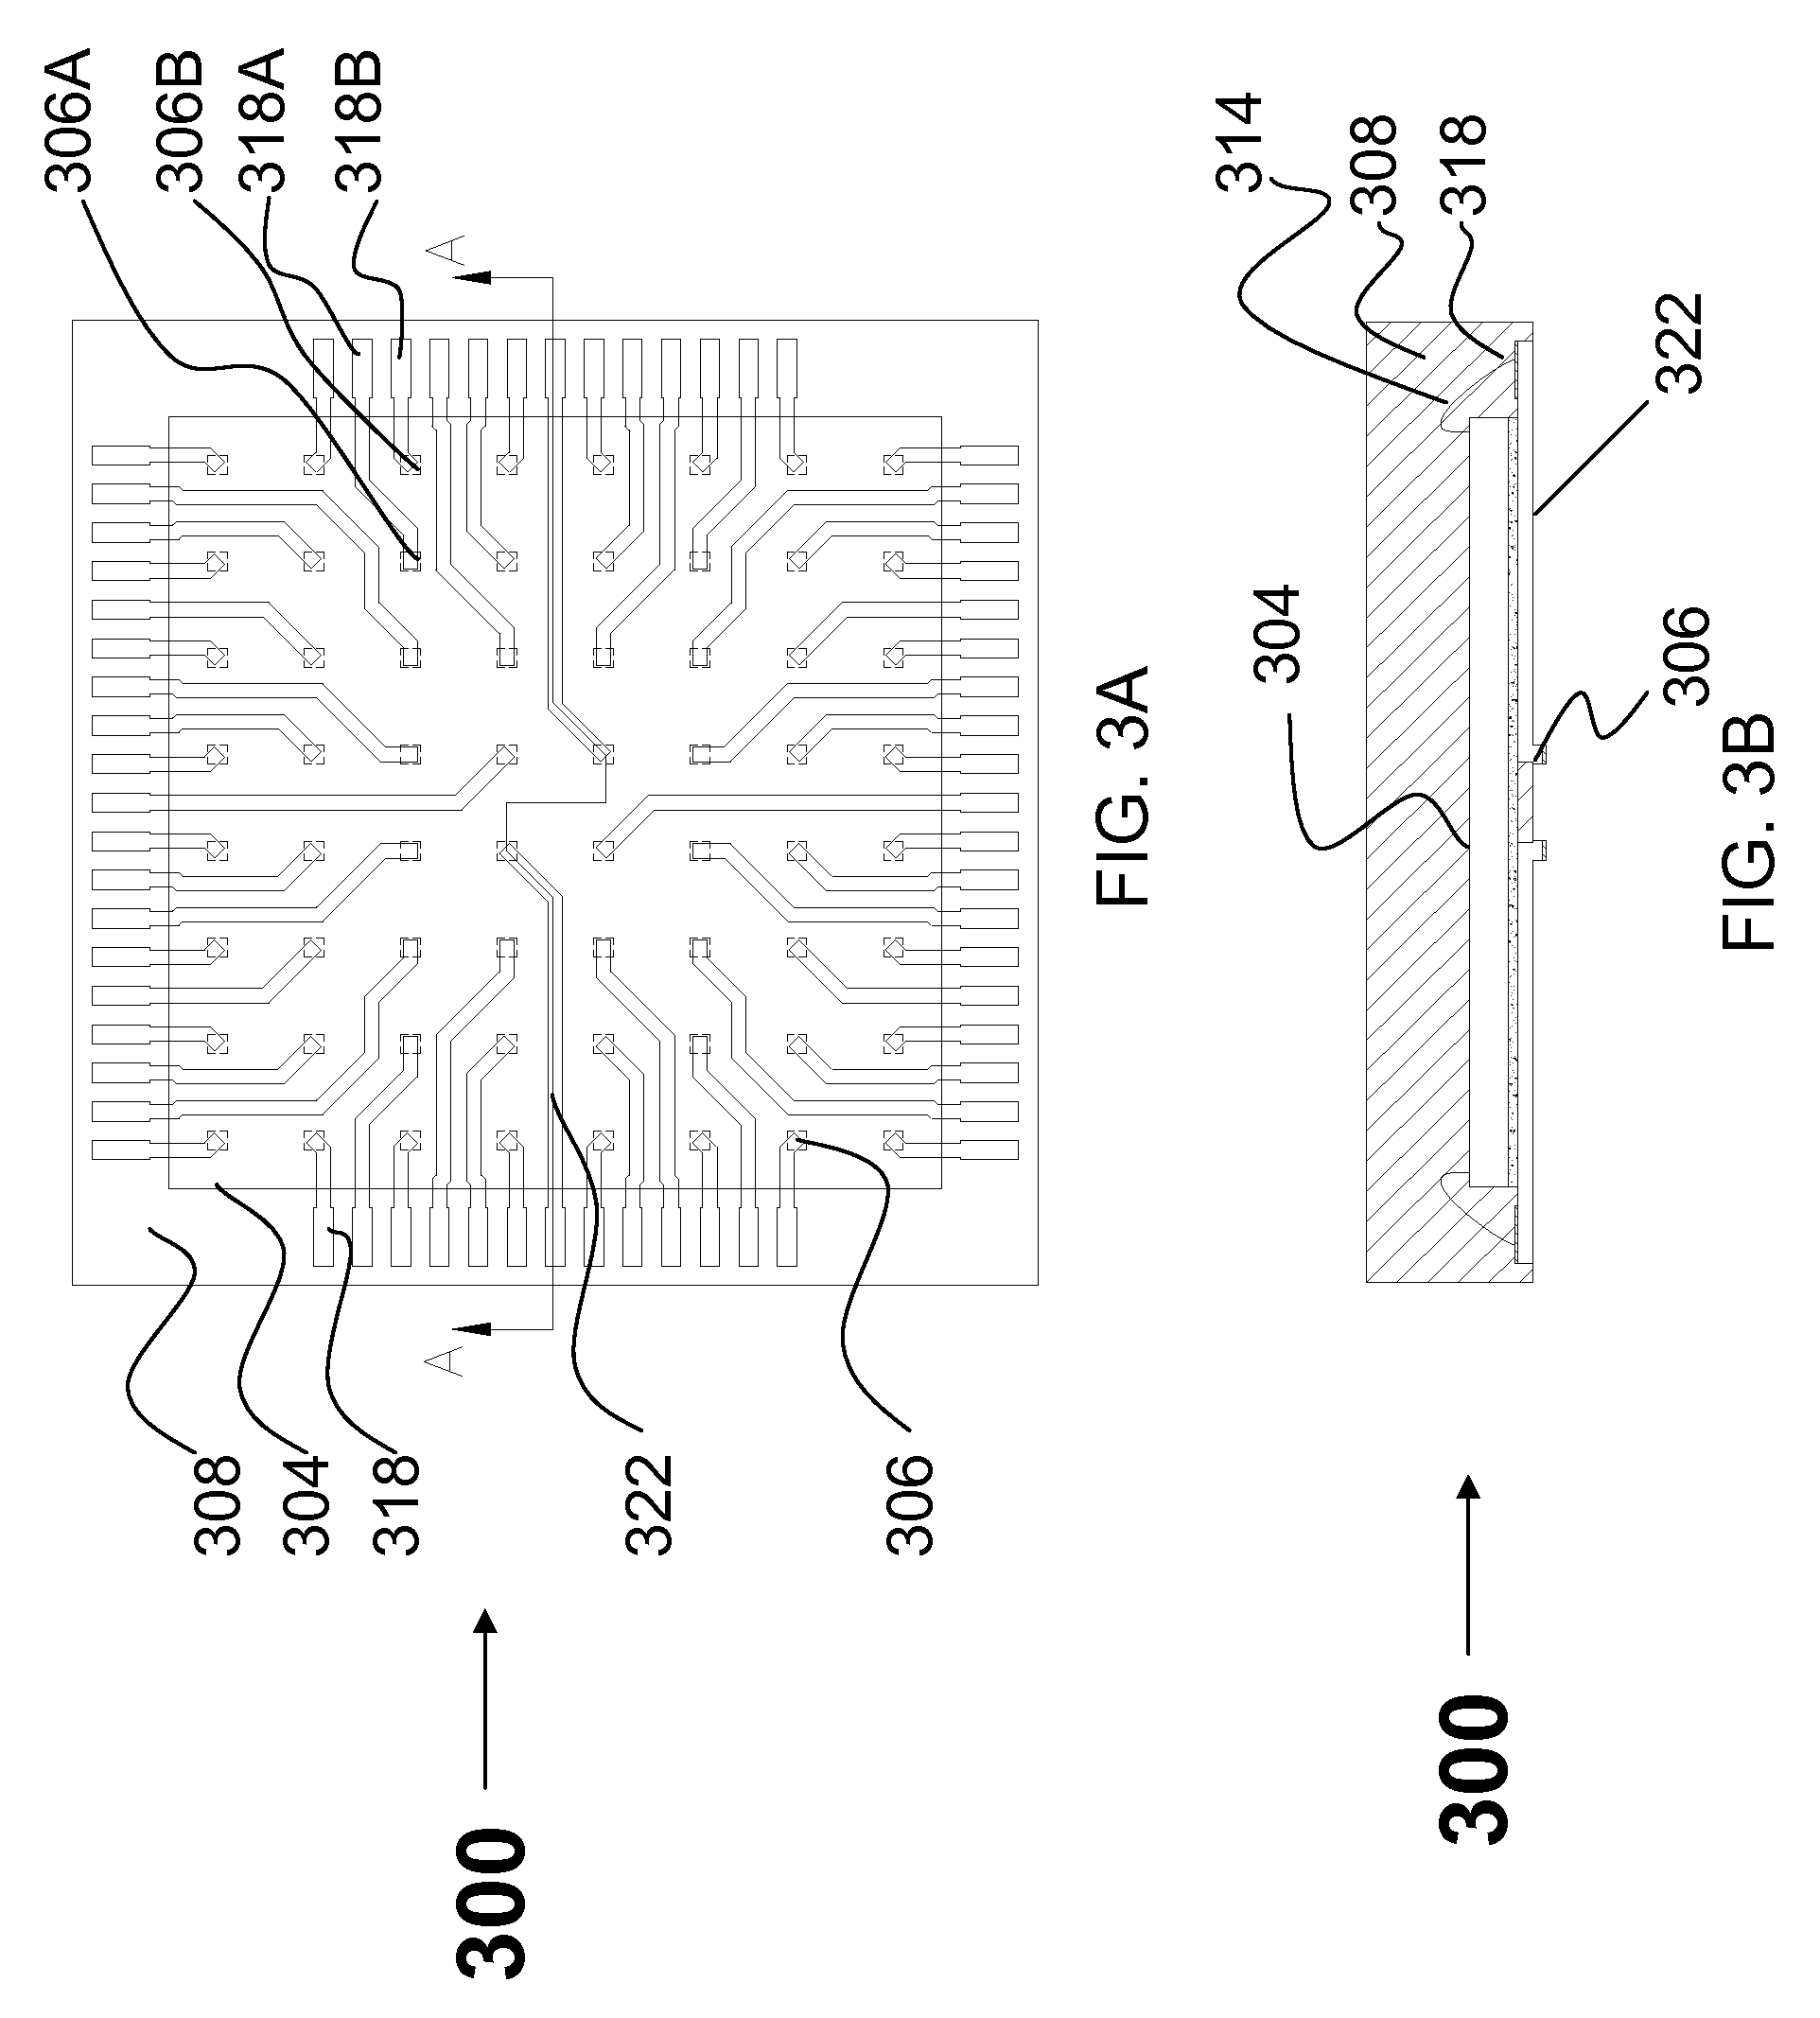 Leadless integrated circuit package having electrically routed contacts